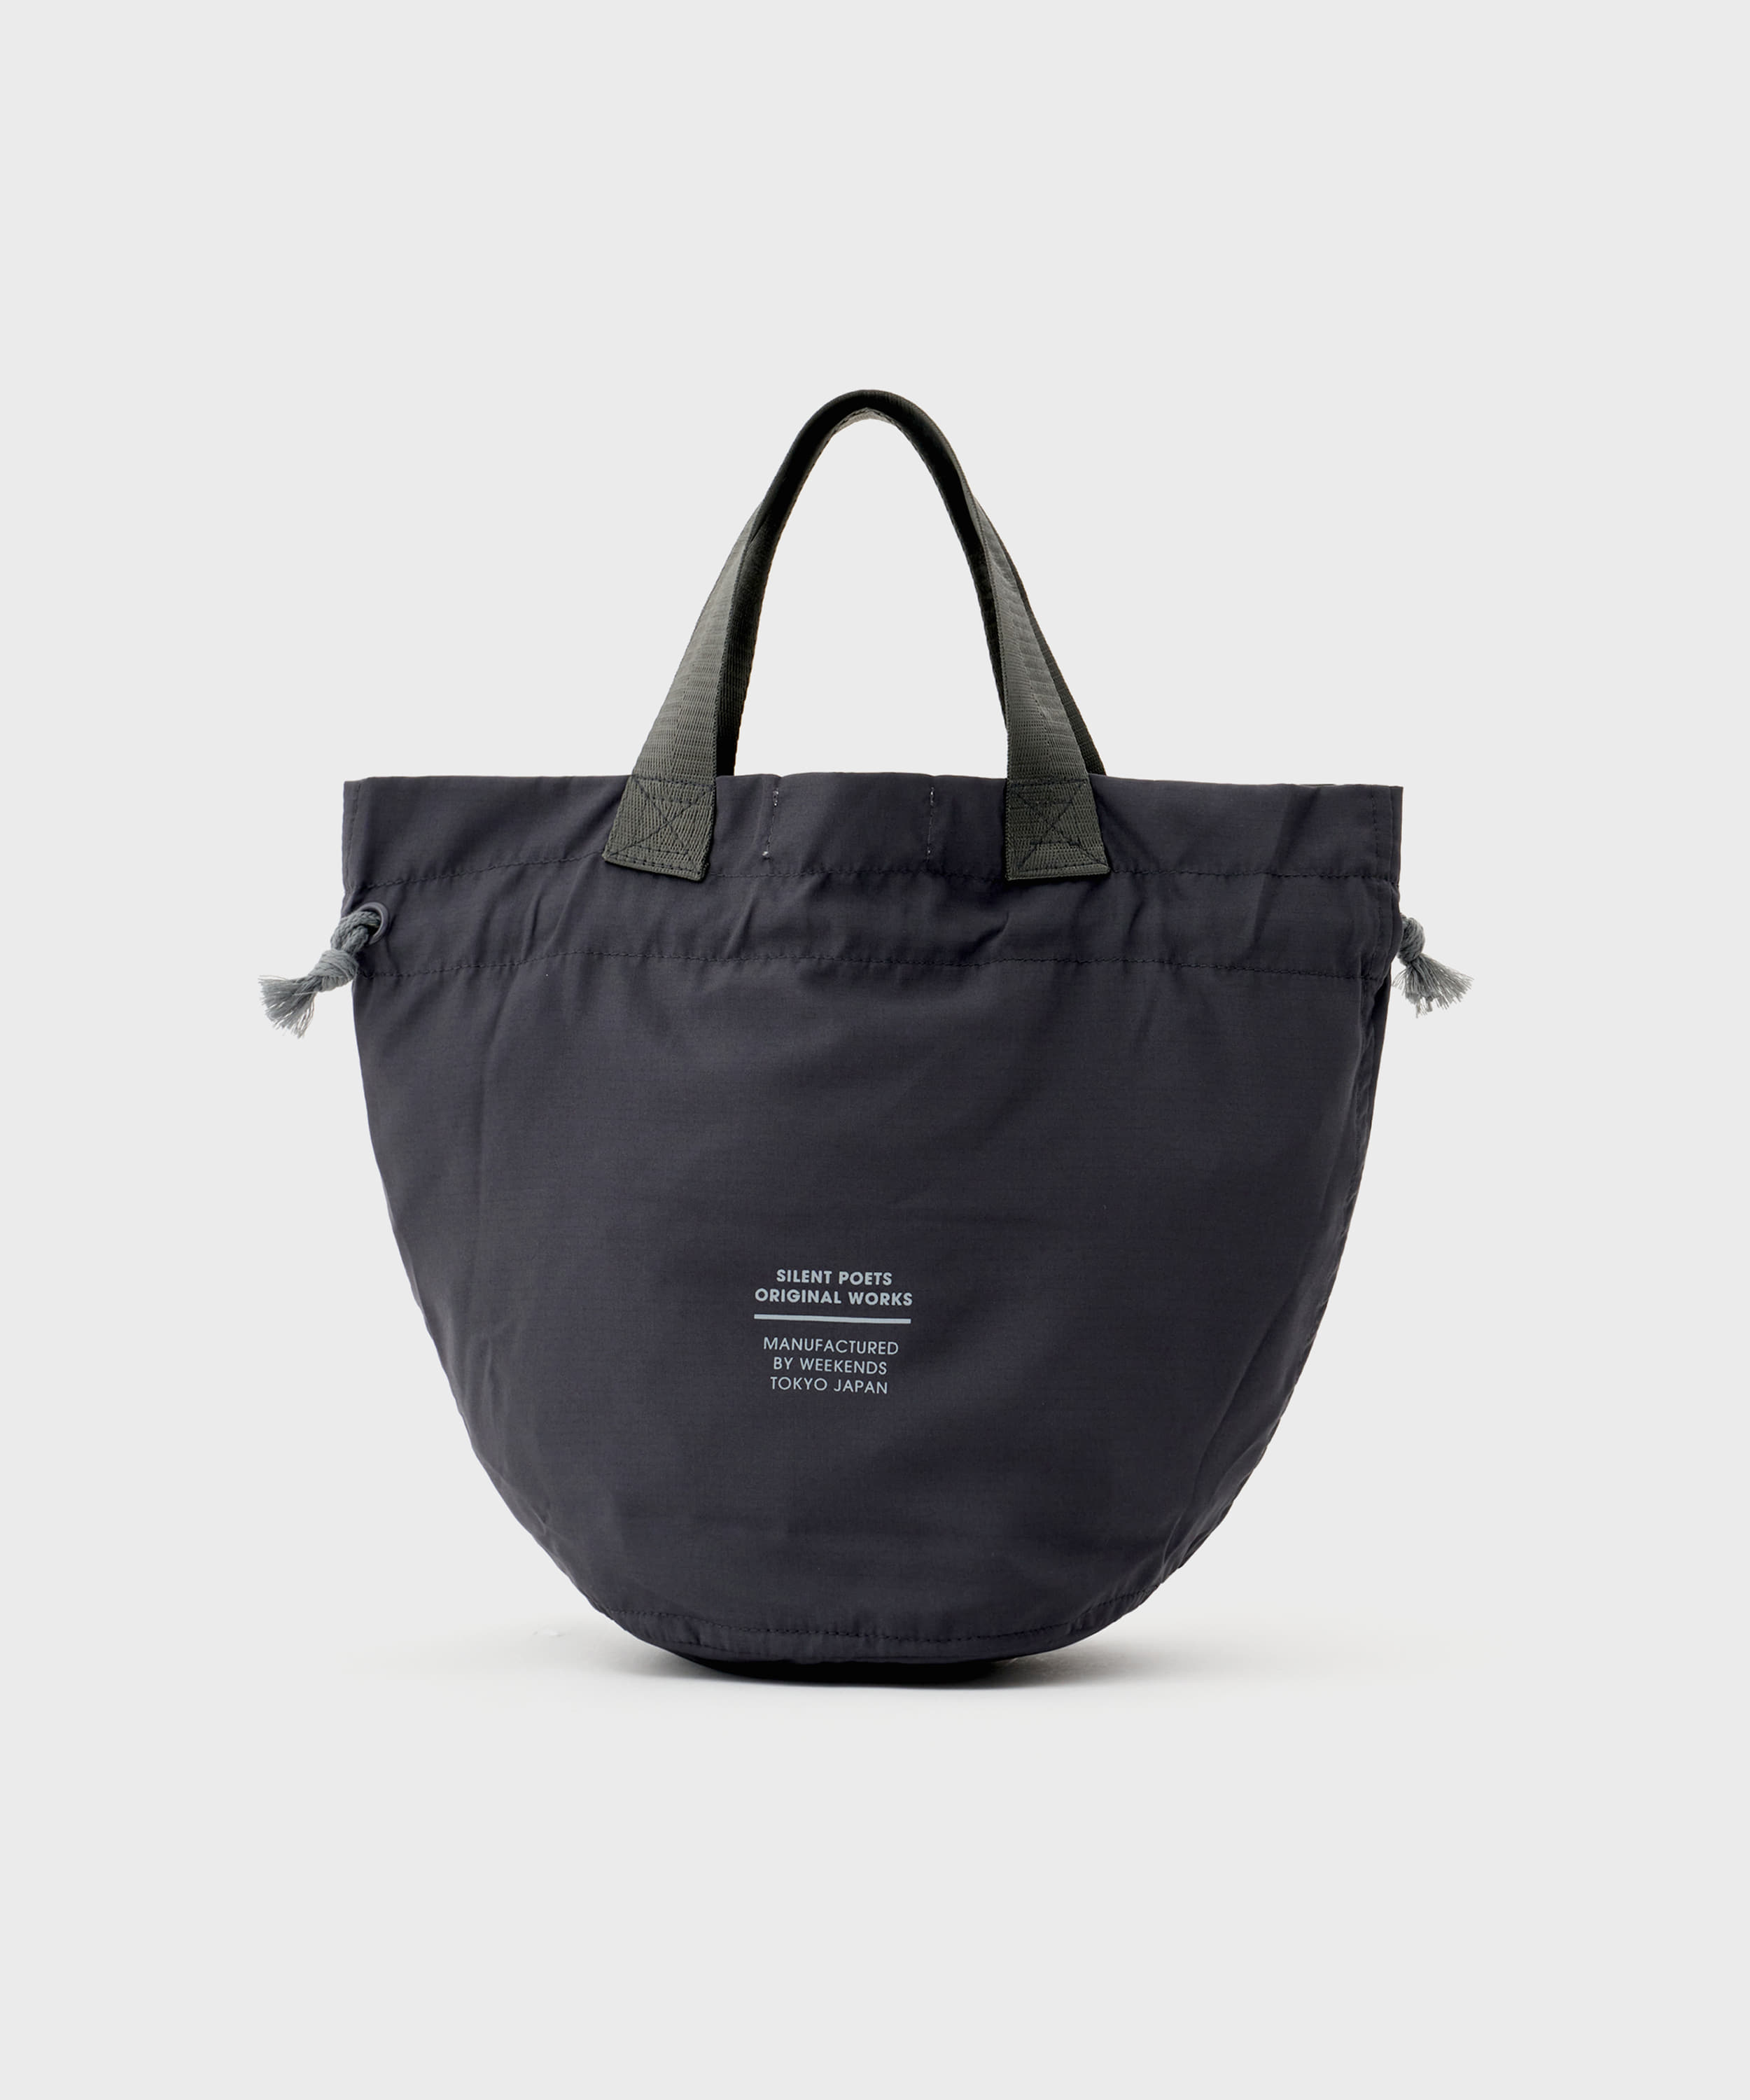 PMD+BIRDERS Recycled Polyester Bag (Carbon)